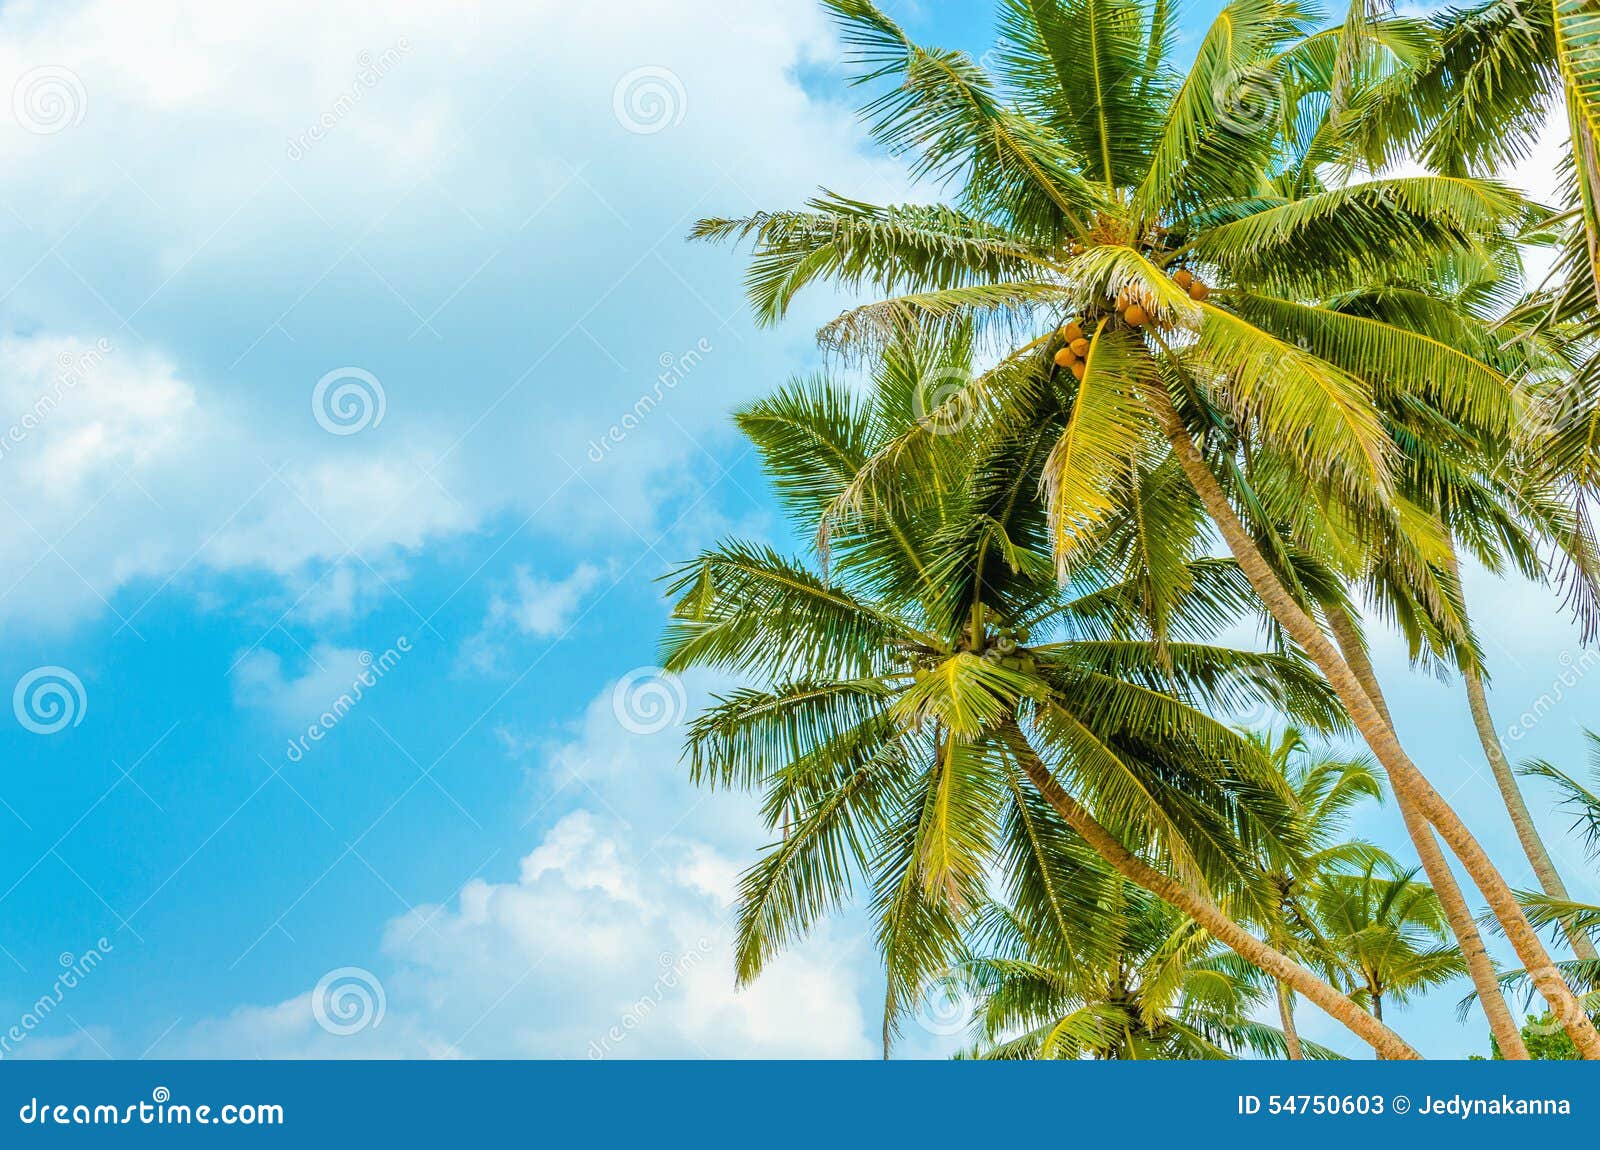 Sandy Beach with Coconut Palm Against Blue Sky Stock Image - Image of ...